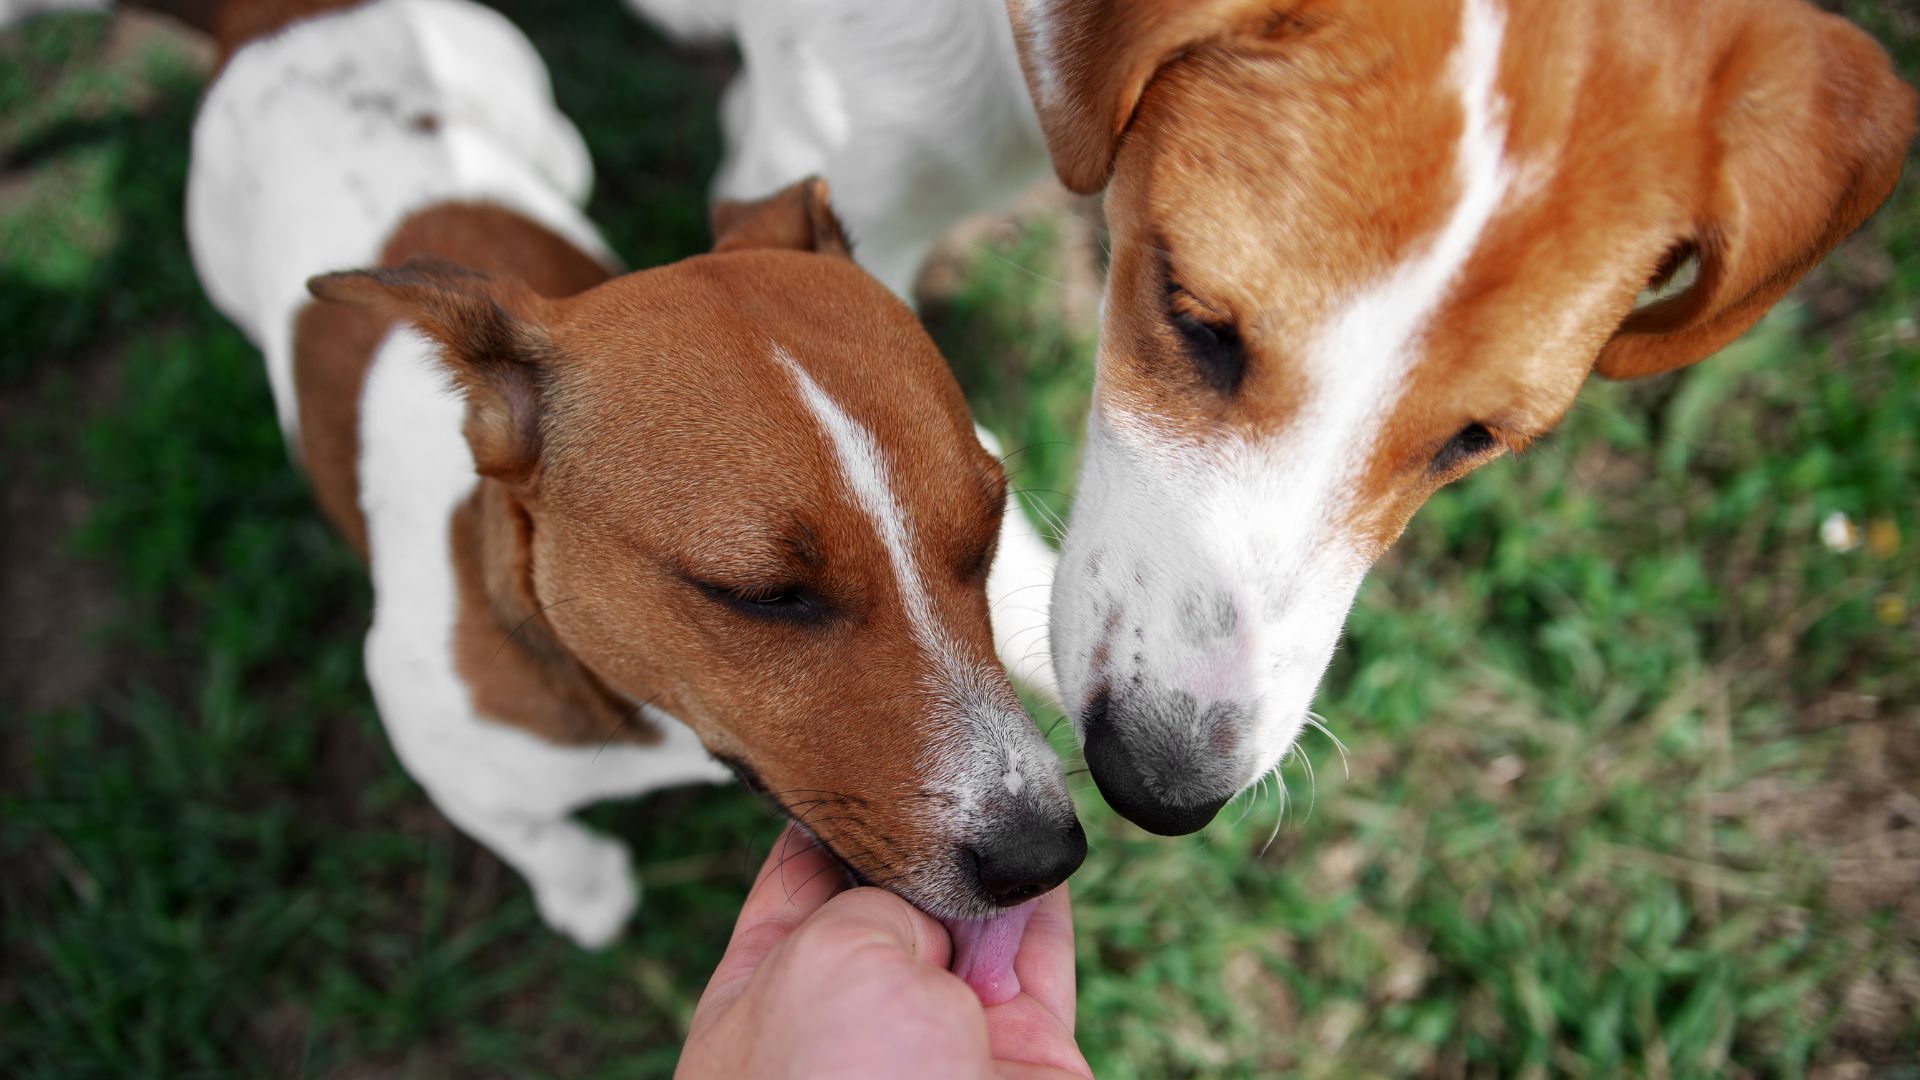 Trainer shares 3 tips for avoiding two dogs fighting, and they're all really simple